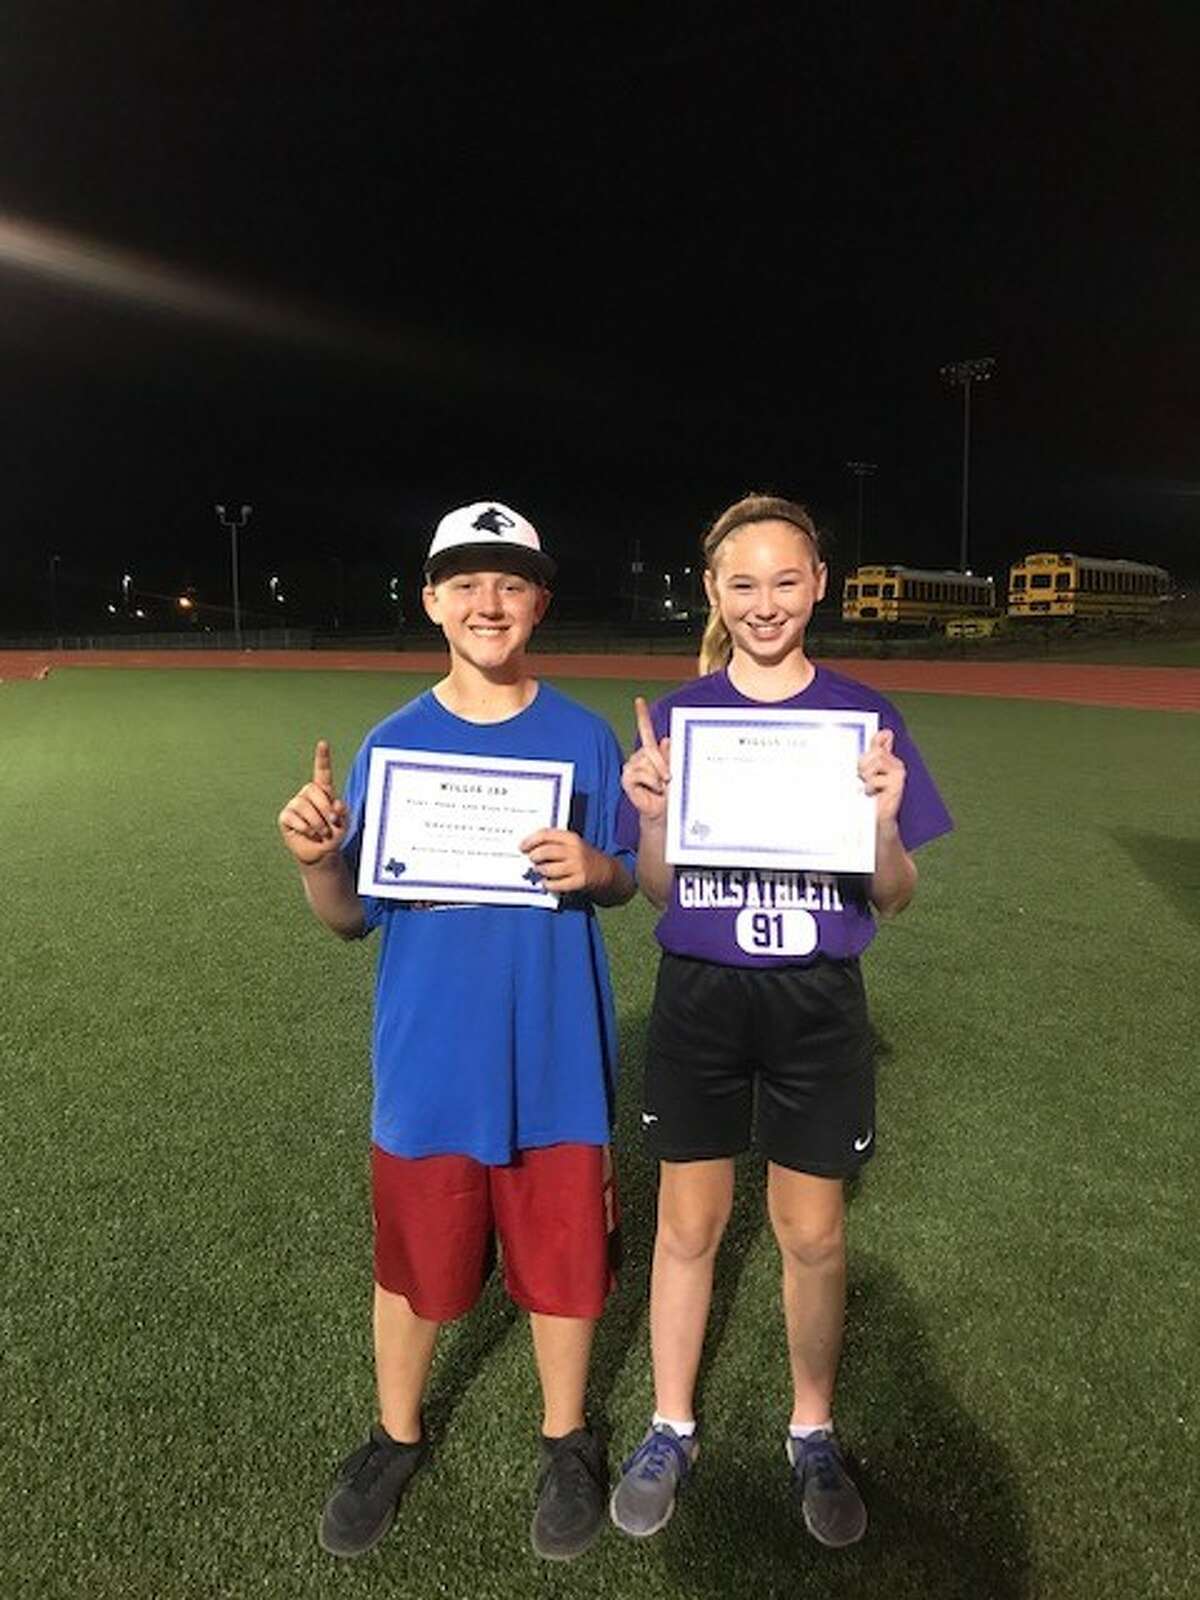 Lynn Lucas Middle School students Greg Moore and Georgia Paugh took the district wideÂ Punt Pass & Kick competition this year over Brabham Middle School.